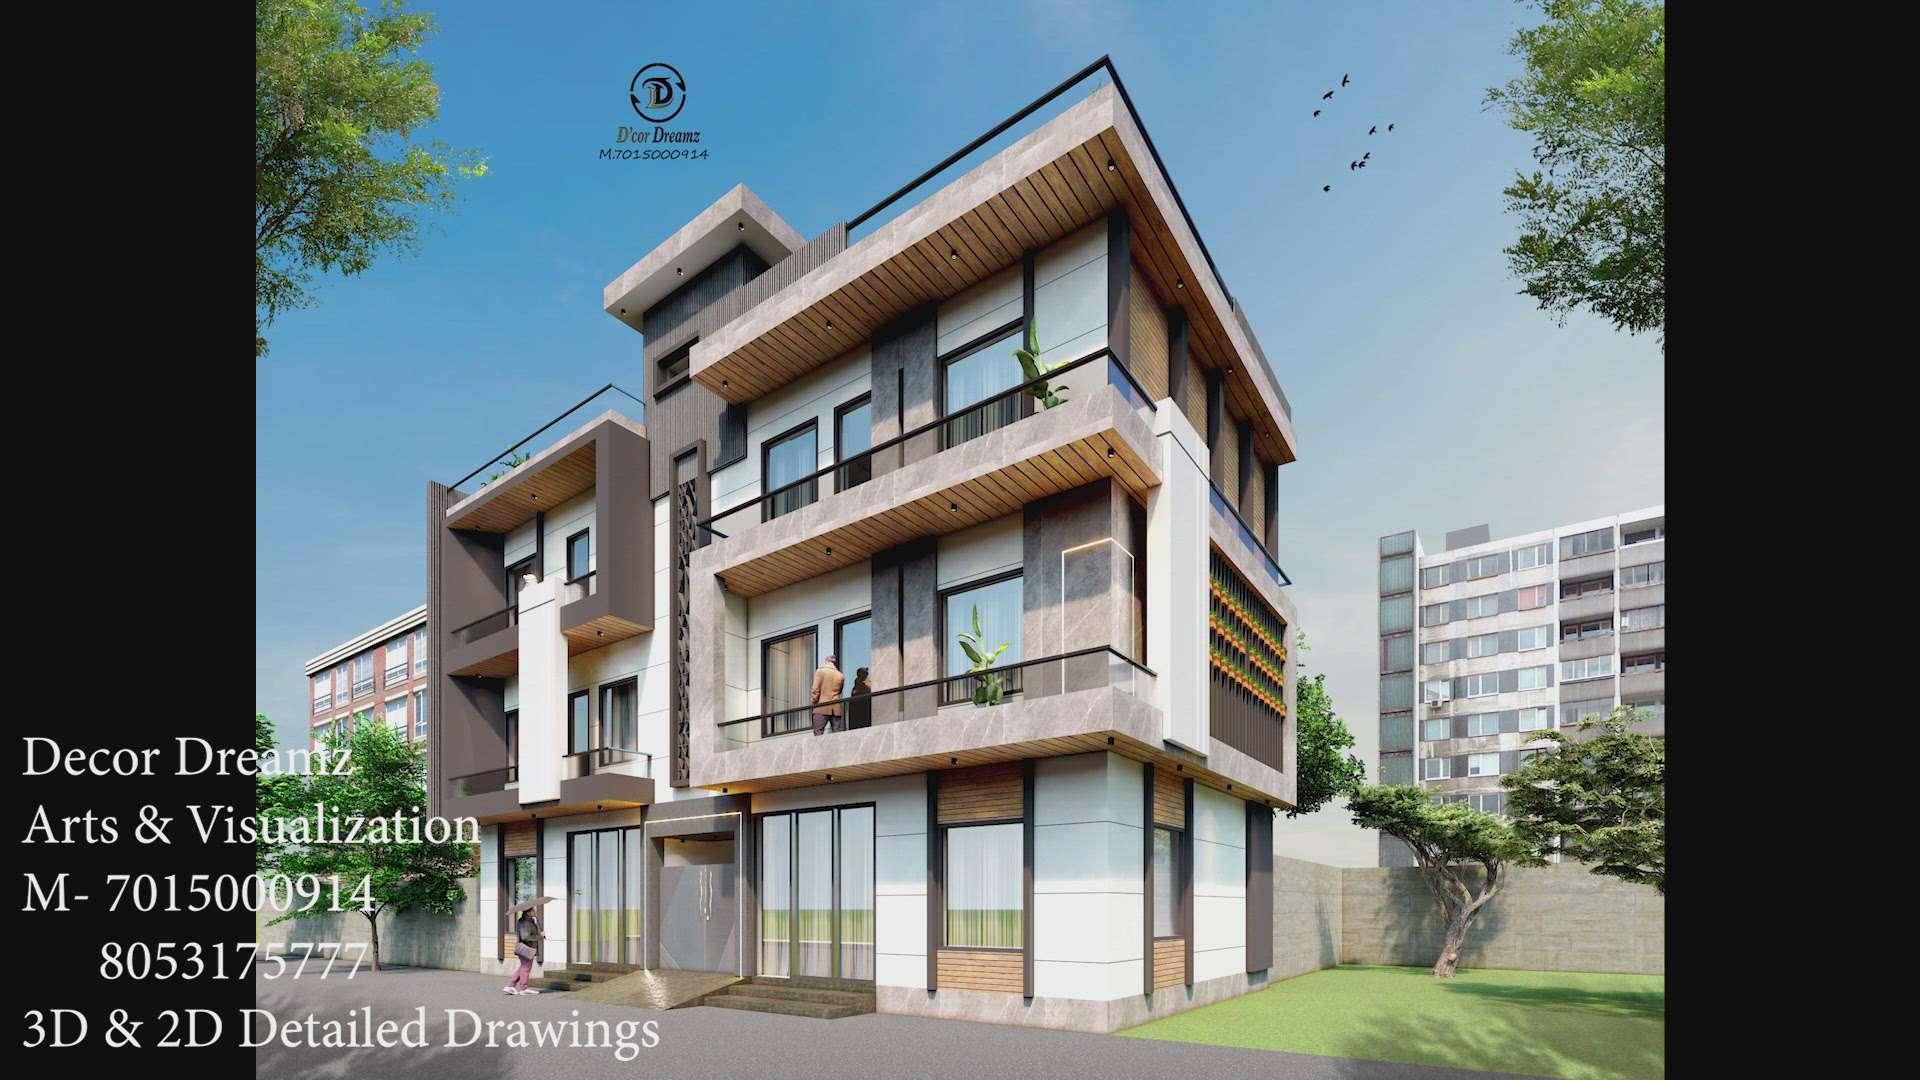 #exterior_Work #3d #exteriors #3D_ELEVATION #ElevationHome #renderlovers #rendering #lumion11pro #exteriorart
Decor Dreamz
Arts & Visualization
M. 8053175777
     7015000914
Contact for 2D and 3D civil and designing drawings.